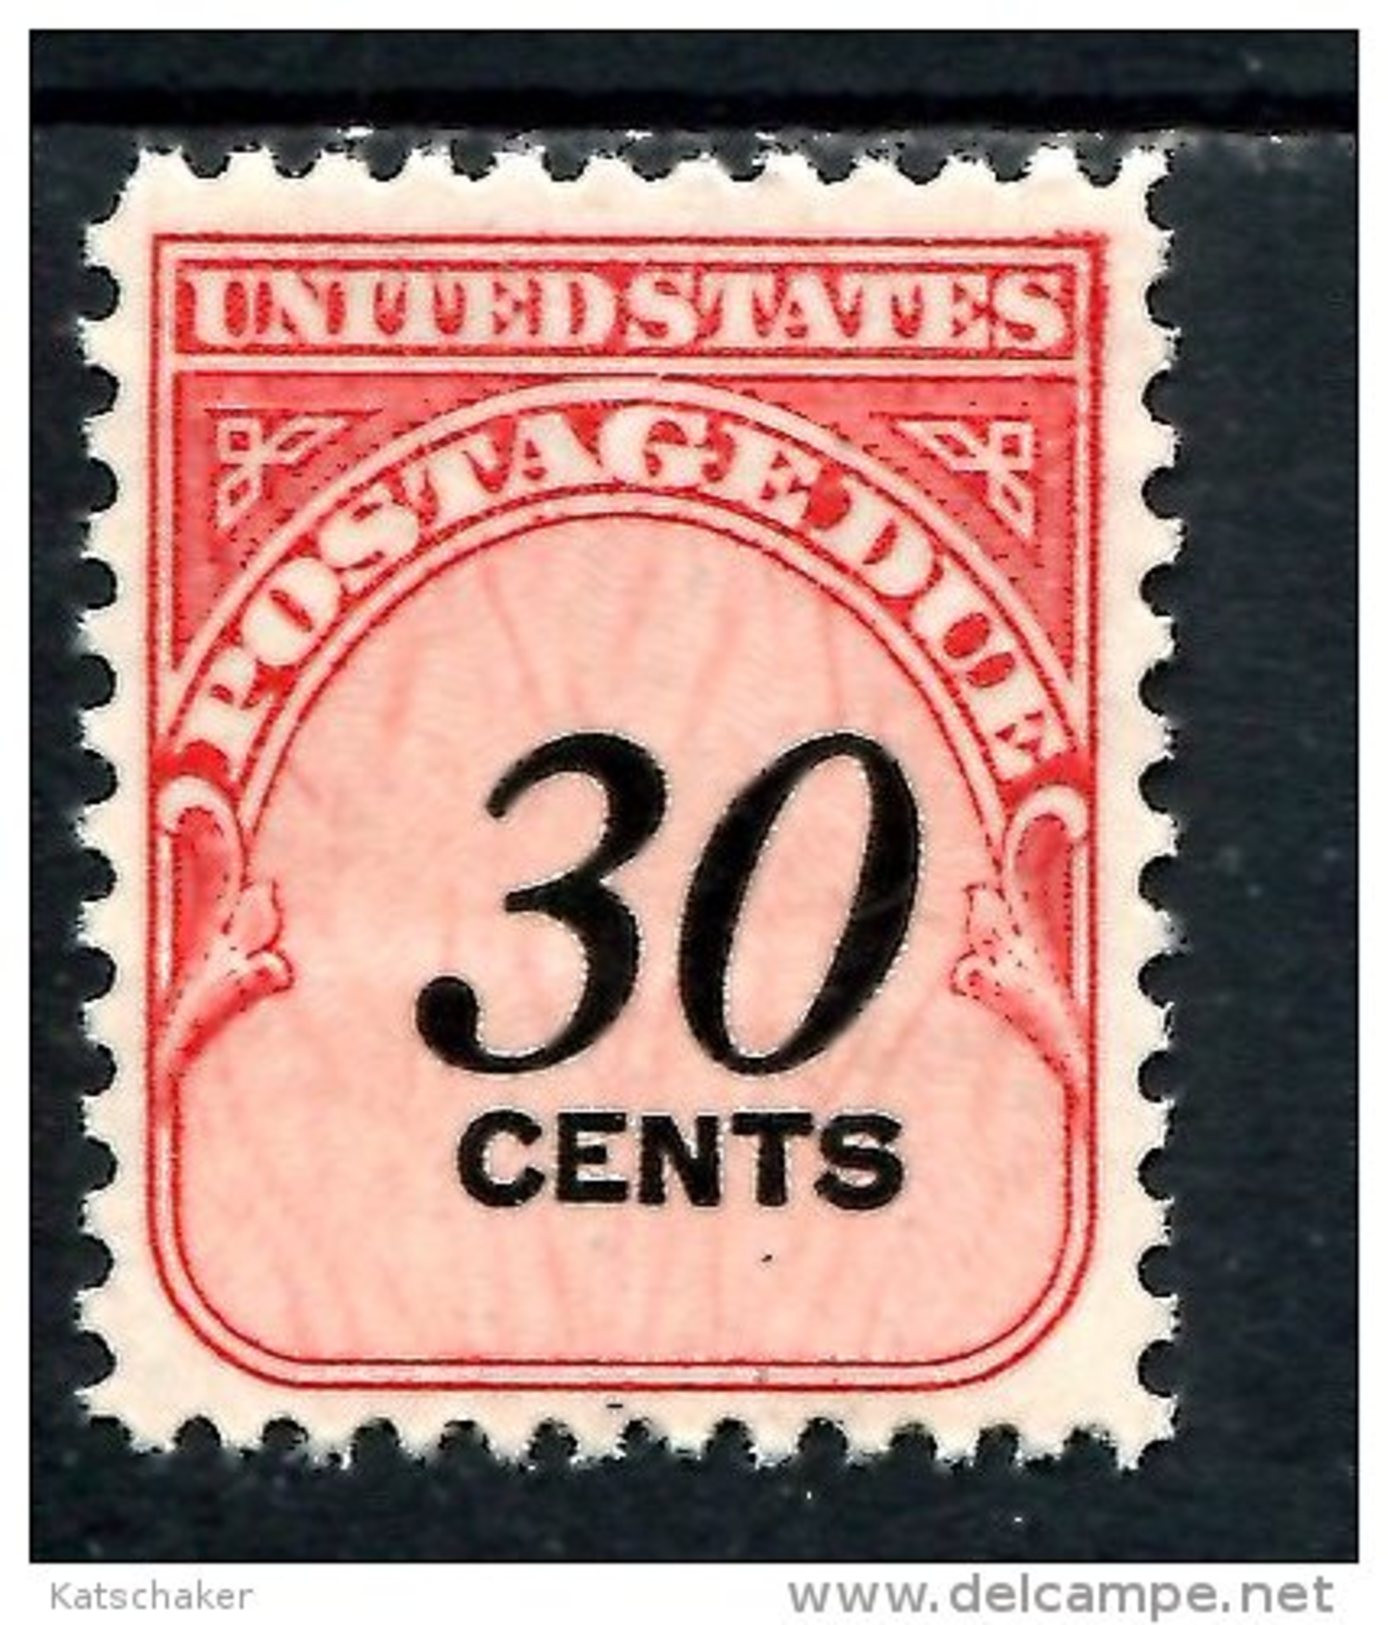 226909033 1959 (XX) POSTFRIS MINT NEVER HINGED  SCOTT J98  POSTAGE DUE STAMP - Postage Due